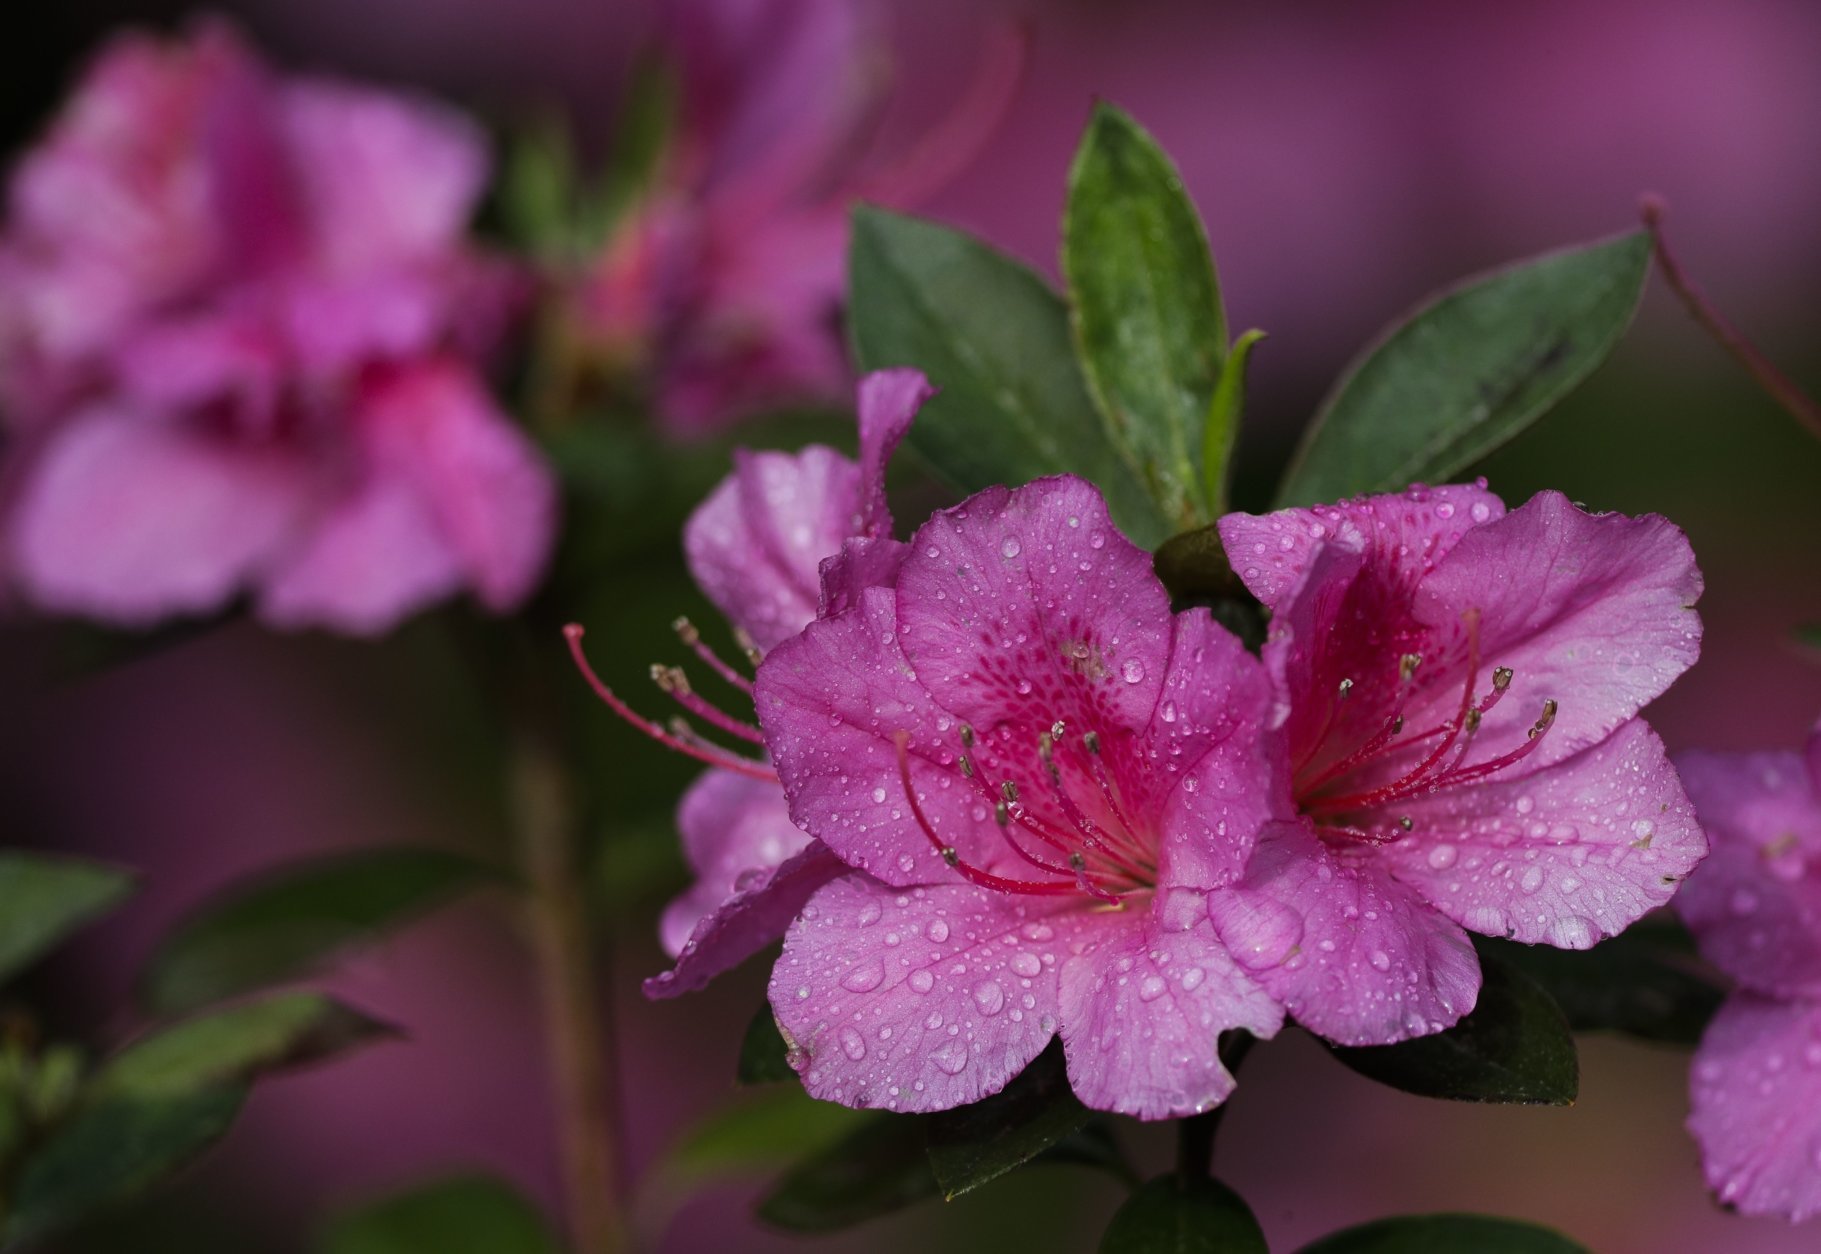 An azalea is seen during a practice round for the Masters golf tournament Wednesday, April 4, 2018, in Augusta, Ga. (AP Photo/David J. Phillip)